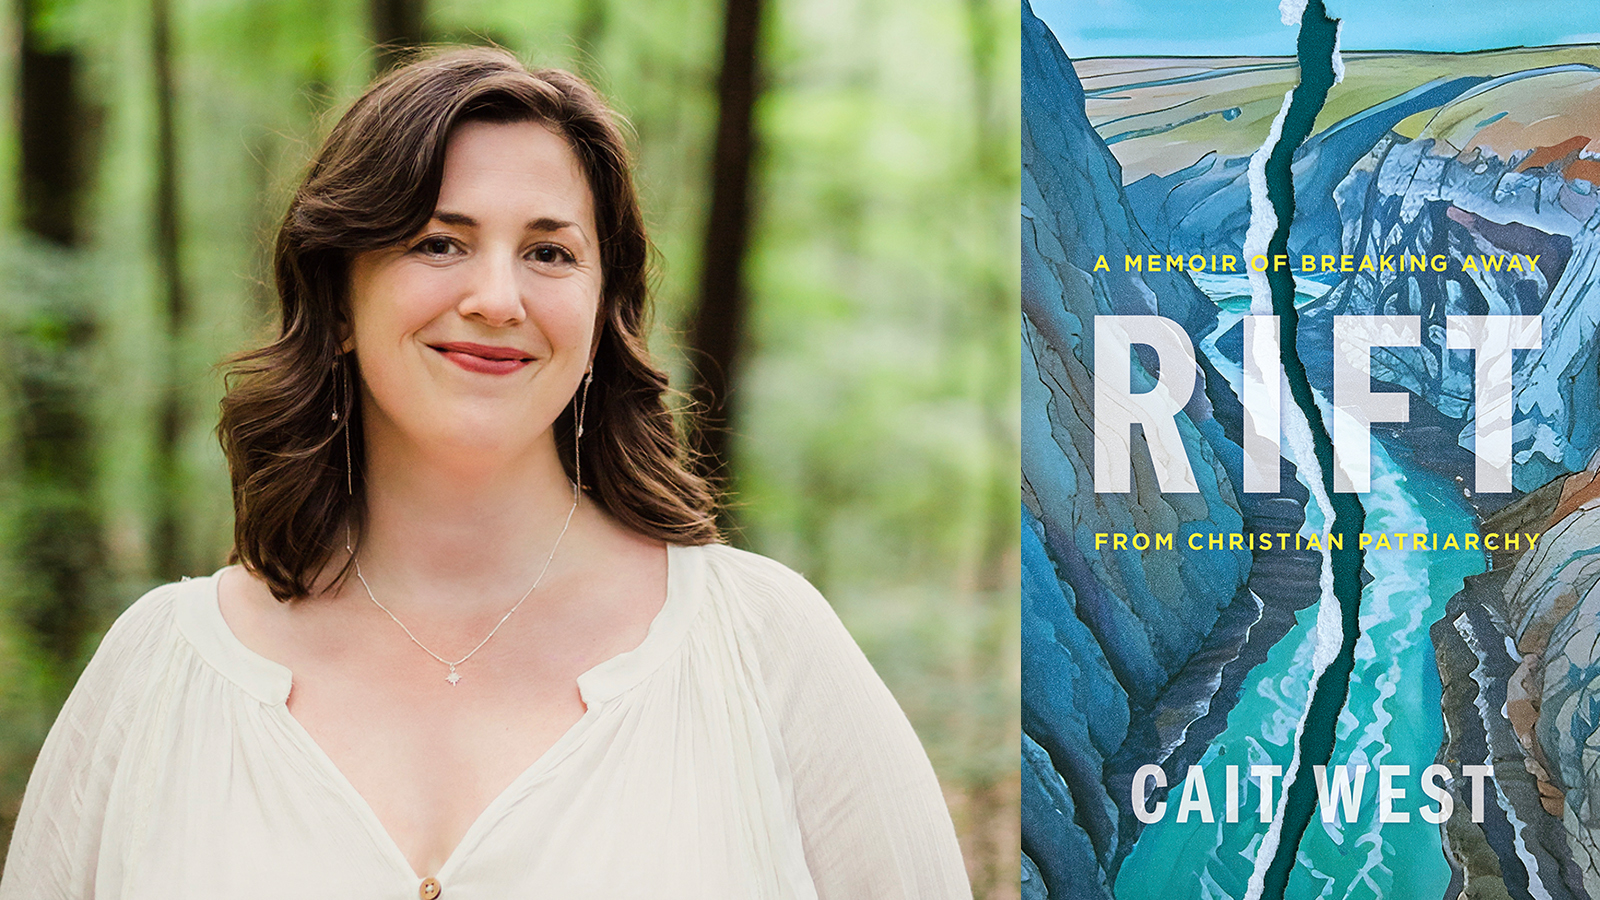 In ‘Rift,’ author Cait West talks breaking free from Christian patriarchy